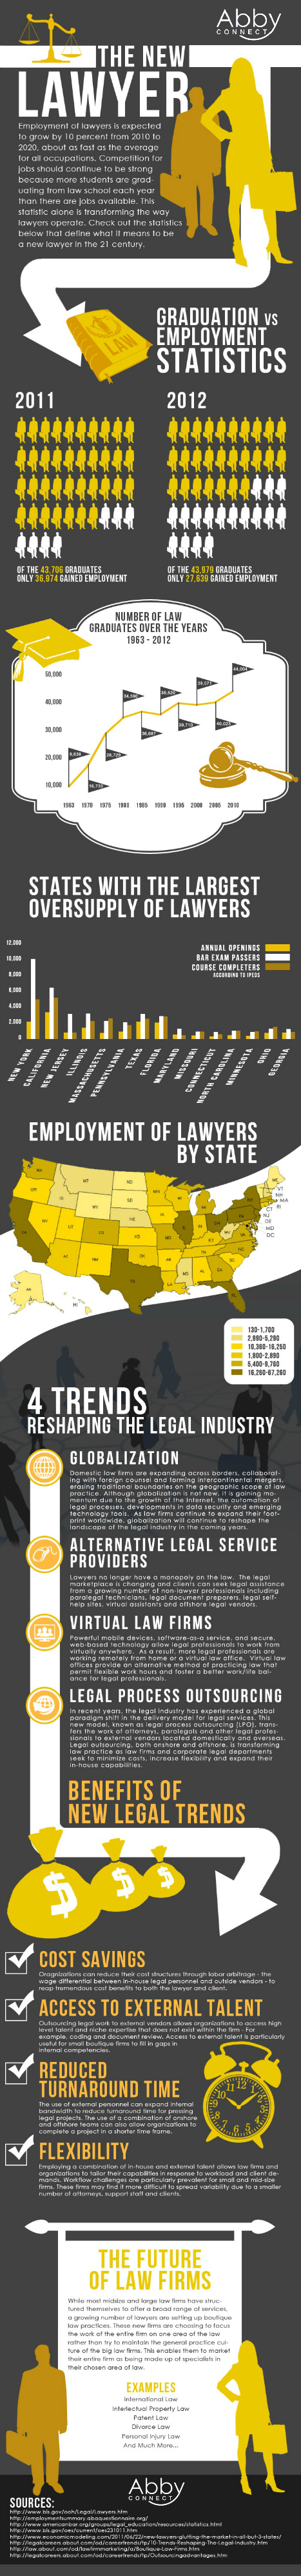 Legal Industry Infographic